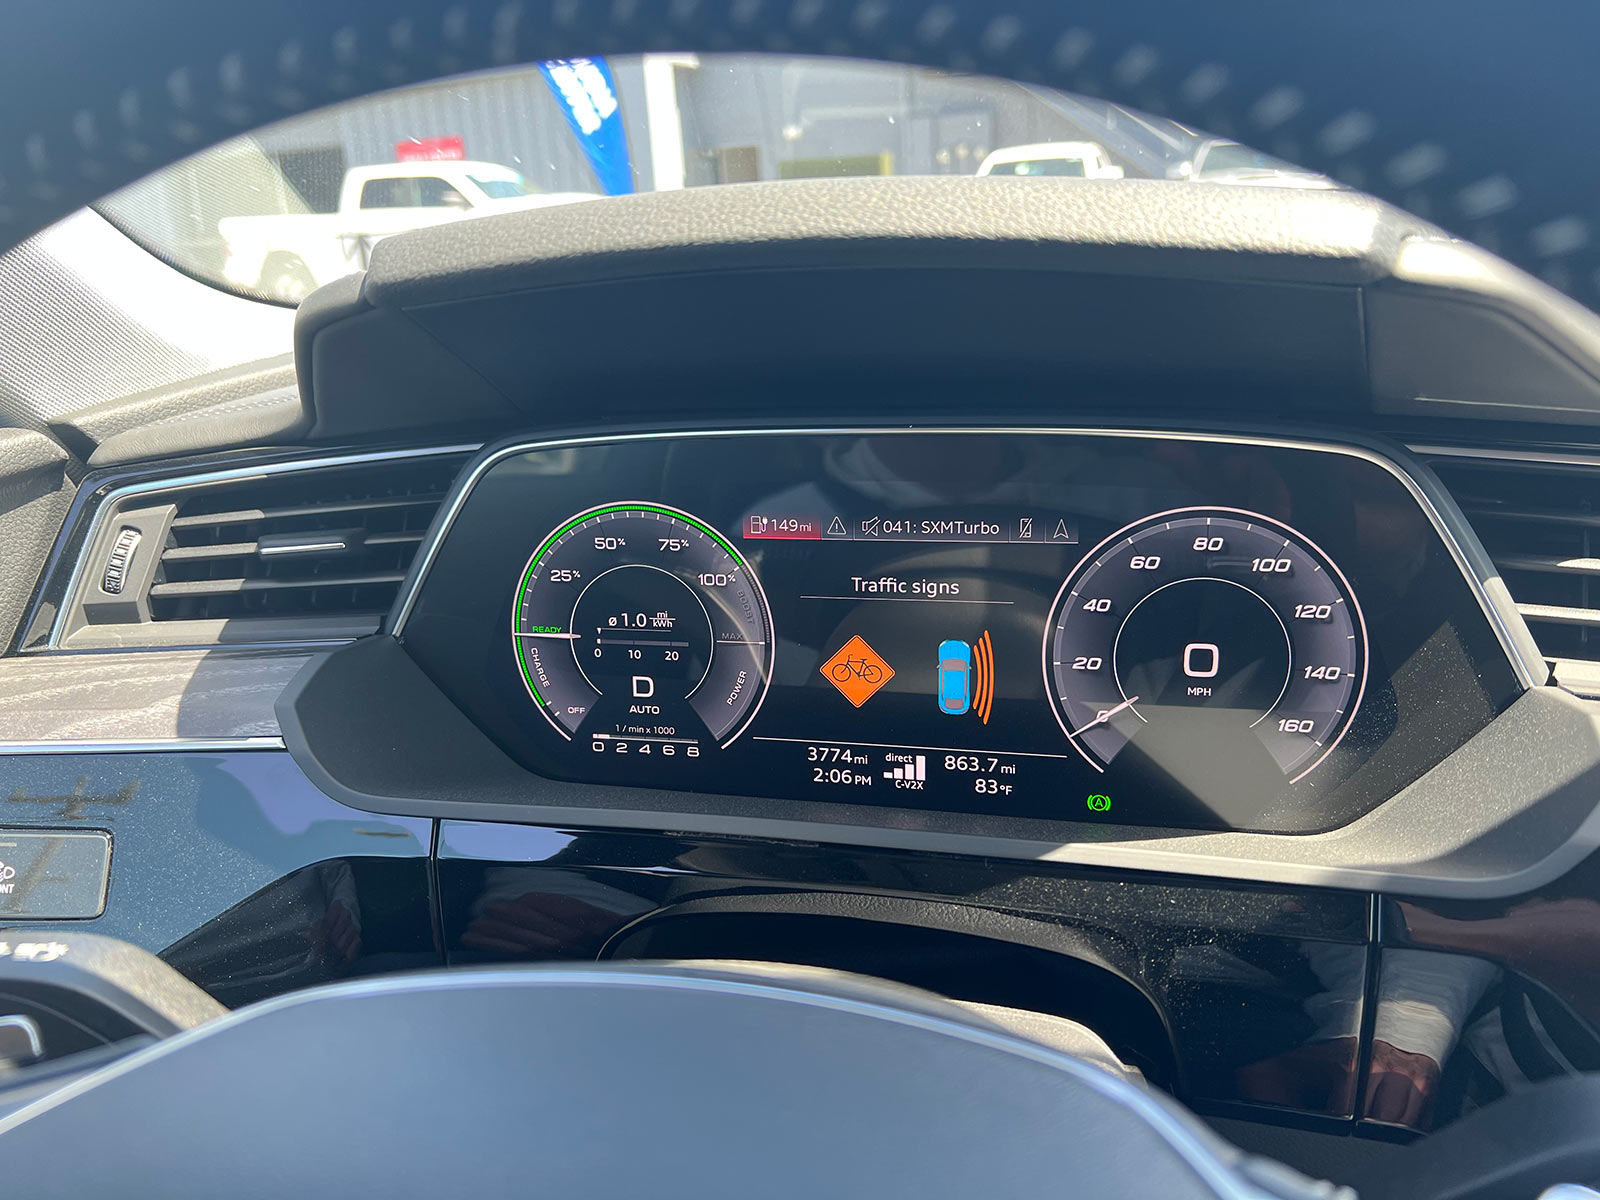 spoke C-V2X car to bicycle safety tech shown on dash of audi